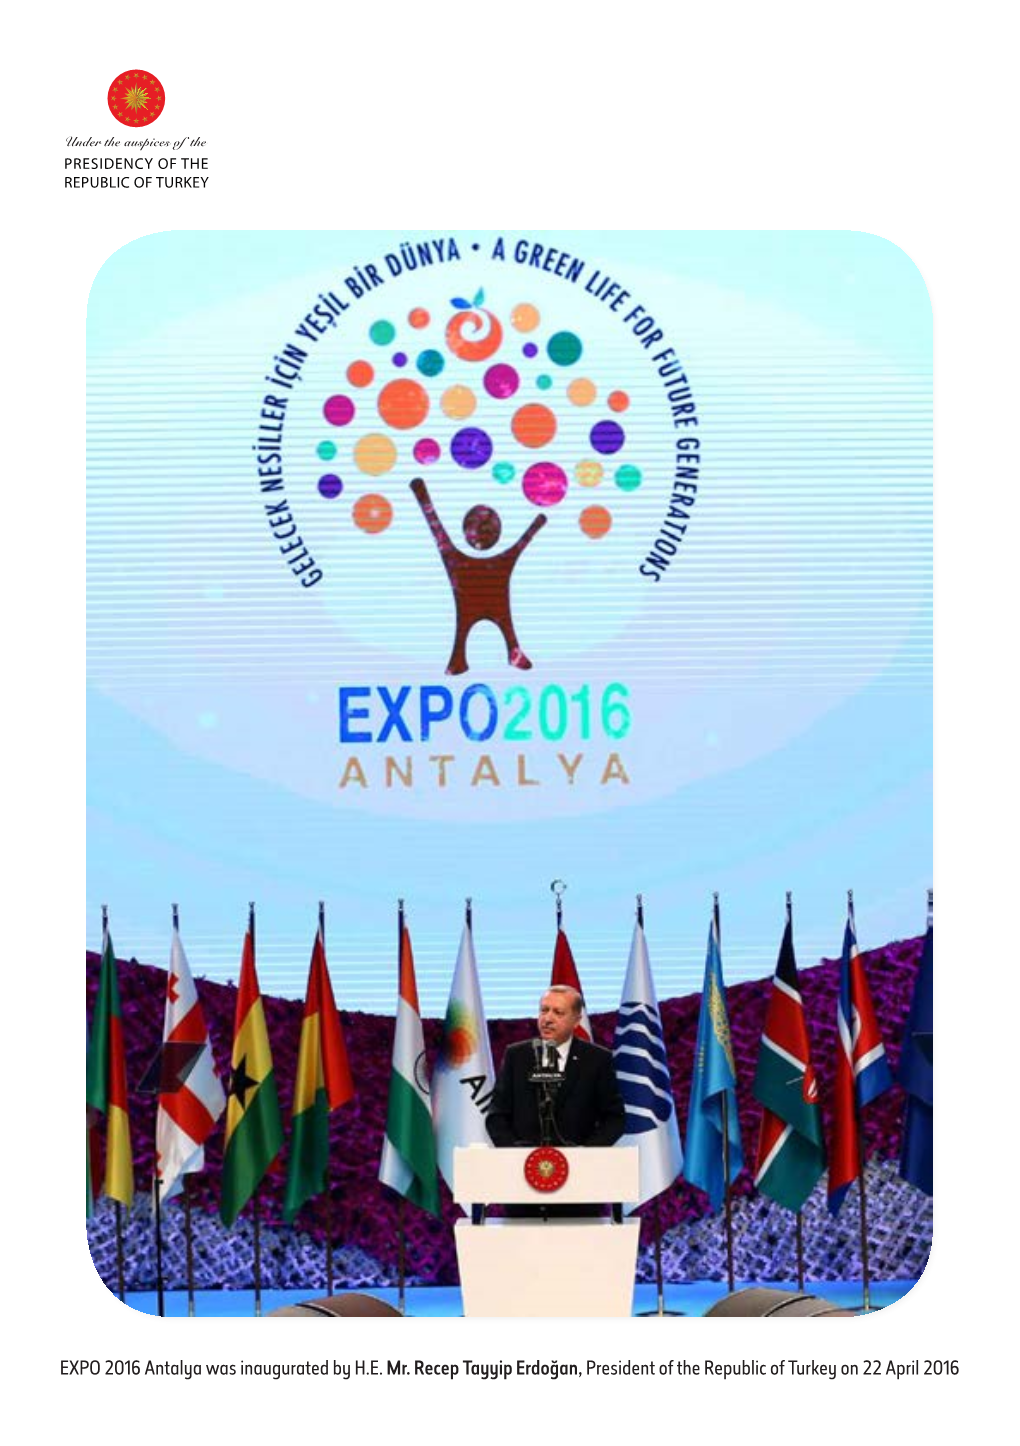 EXPO 2016 Antalya Was Inaugurated by H.E. Mr. Recep Tayyip Erdoğan, President of the Republic of Turkey on 22 April 2016 TABLE of CONTENTS